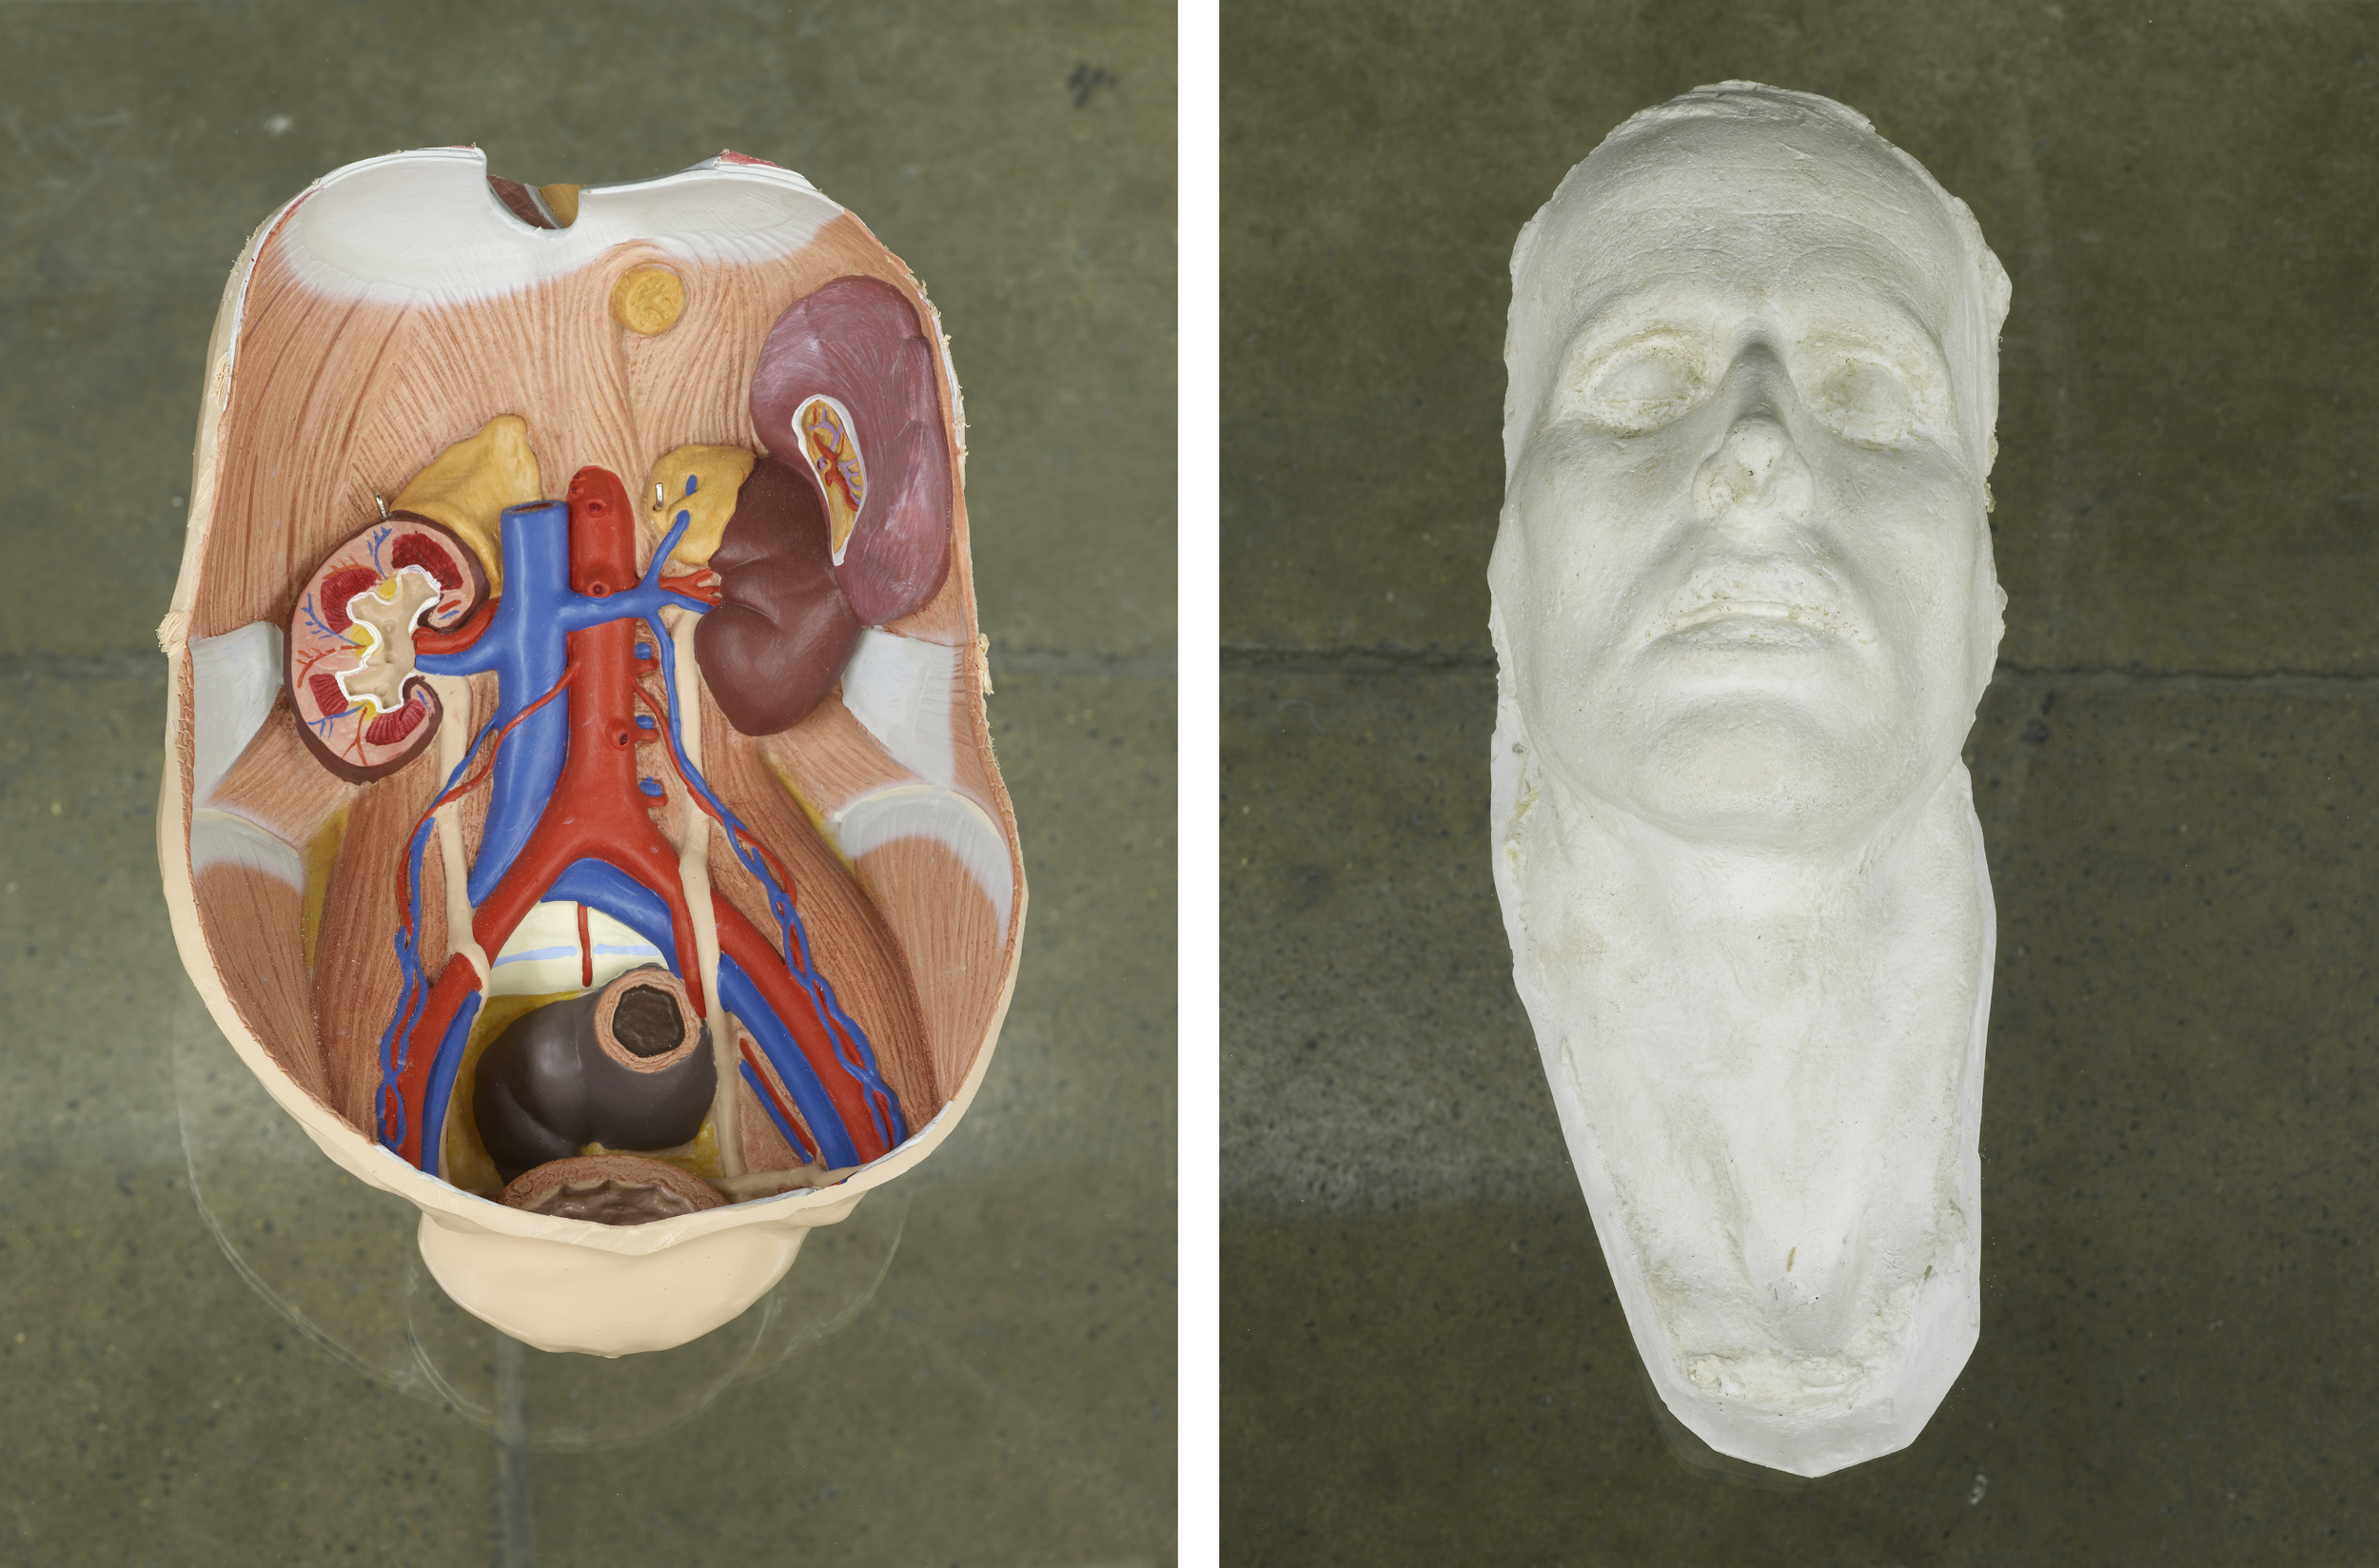      Untitled Vitrine   2012   Plastic anatomical model, silicone mould and plaster cast of a death mask, grasshopper with human hair antennae, glass vitrine   92 x 57.5 x 170 cm / 36.2 x 22.6 x 67 in  